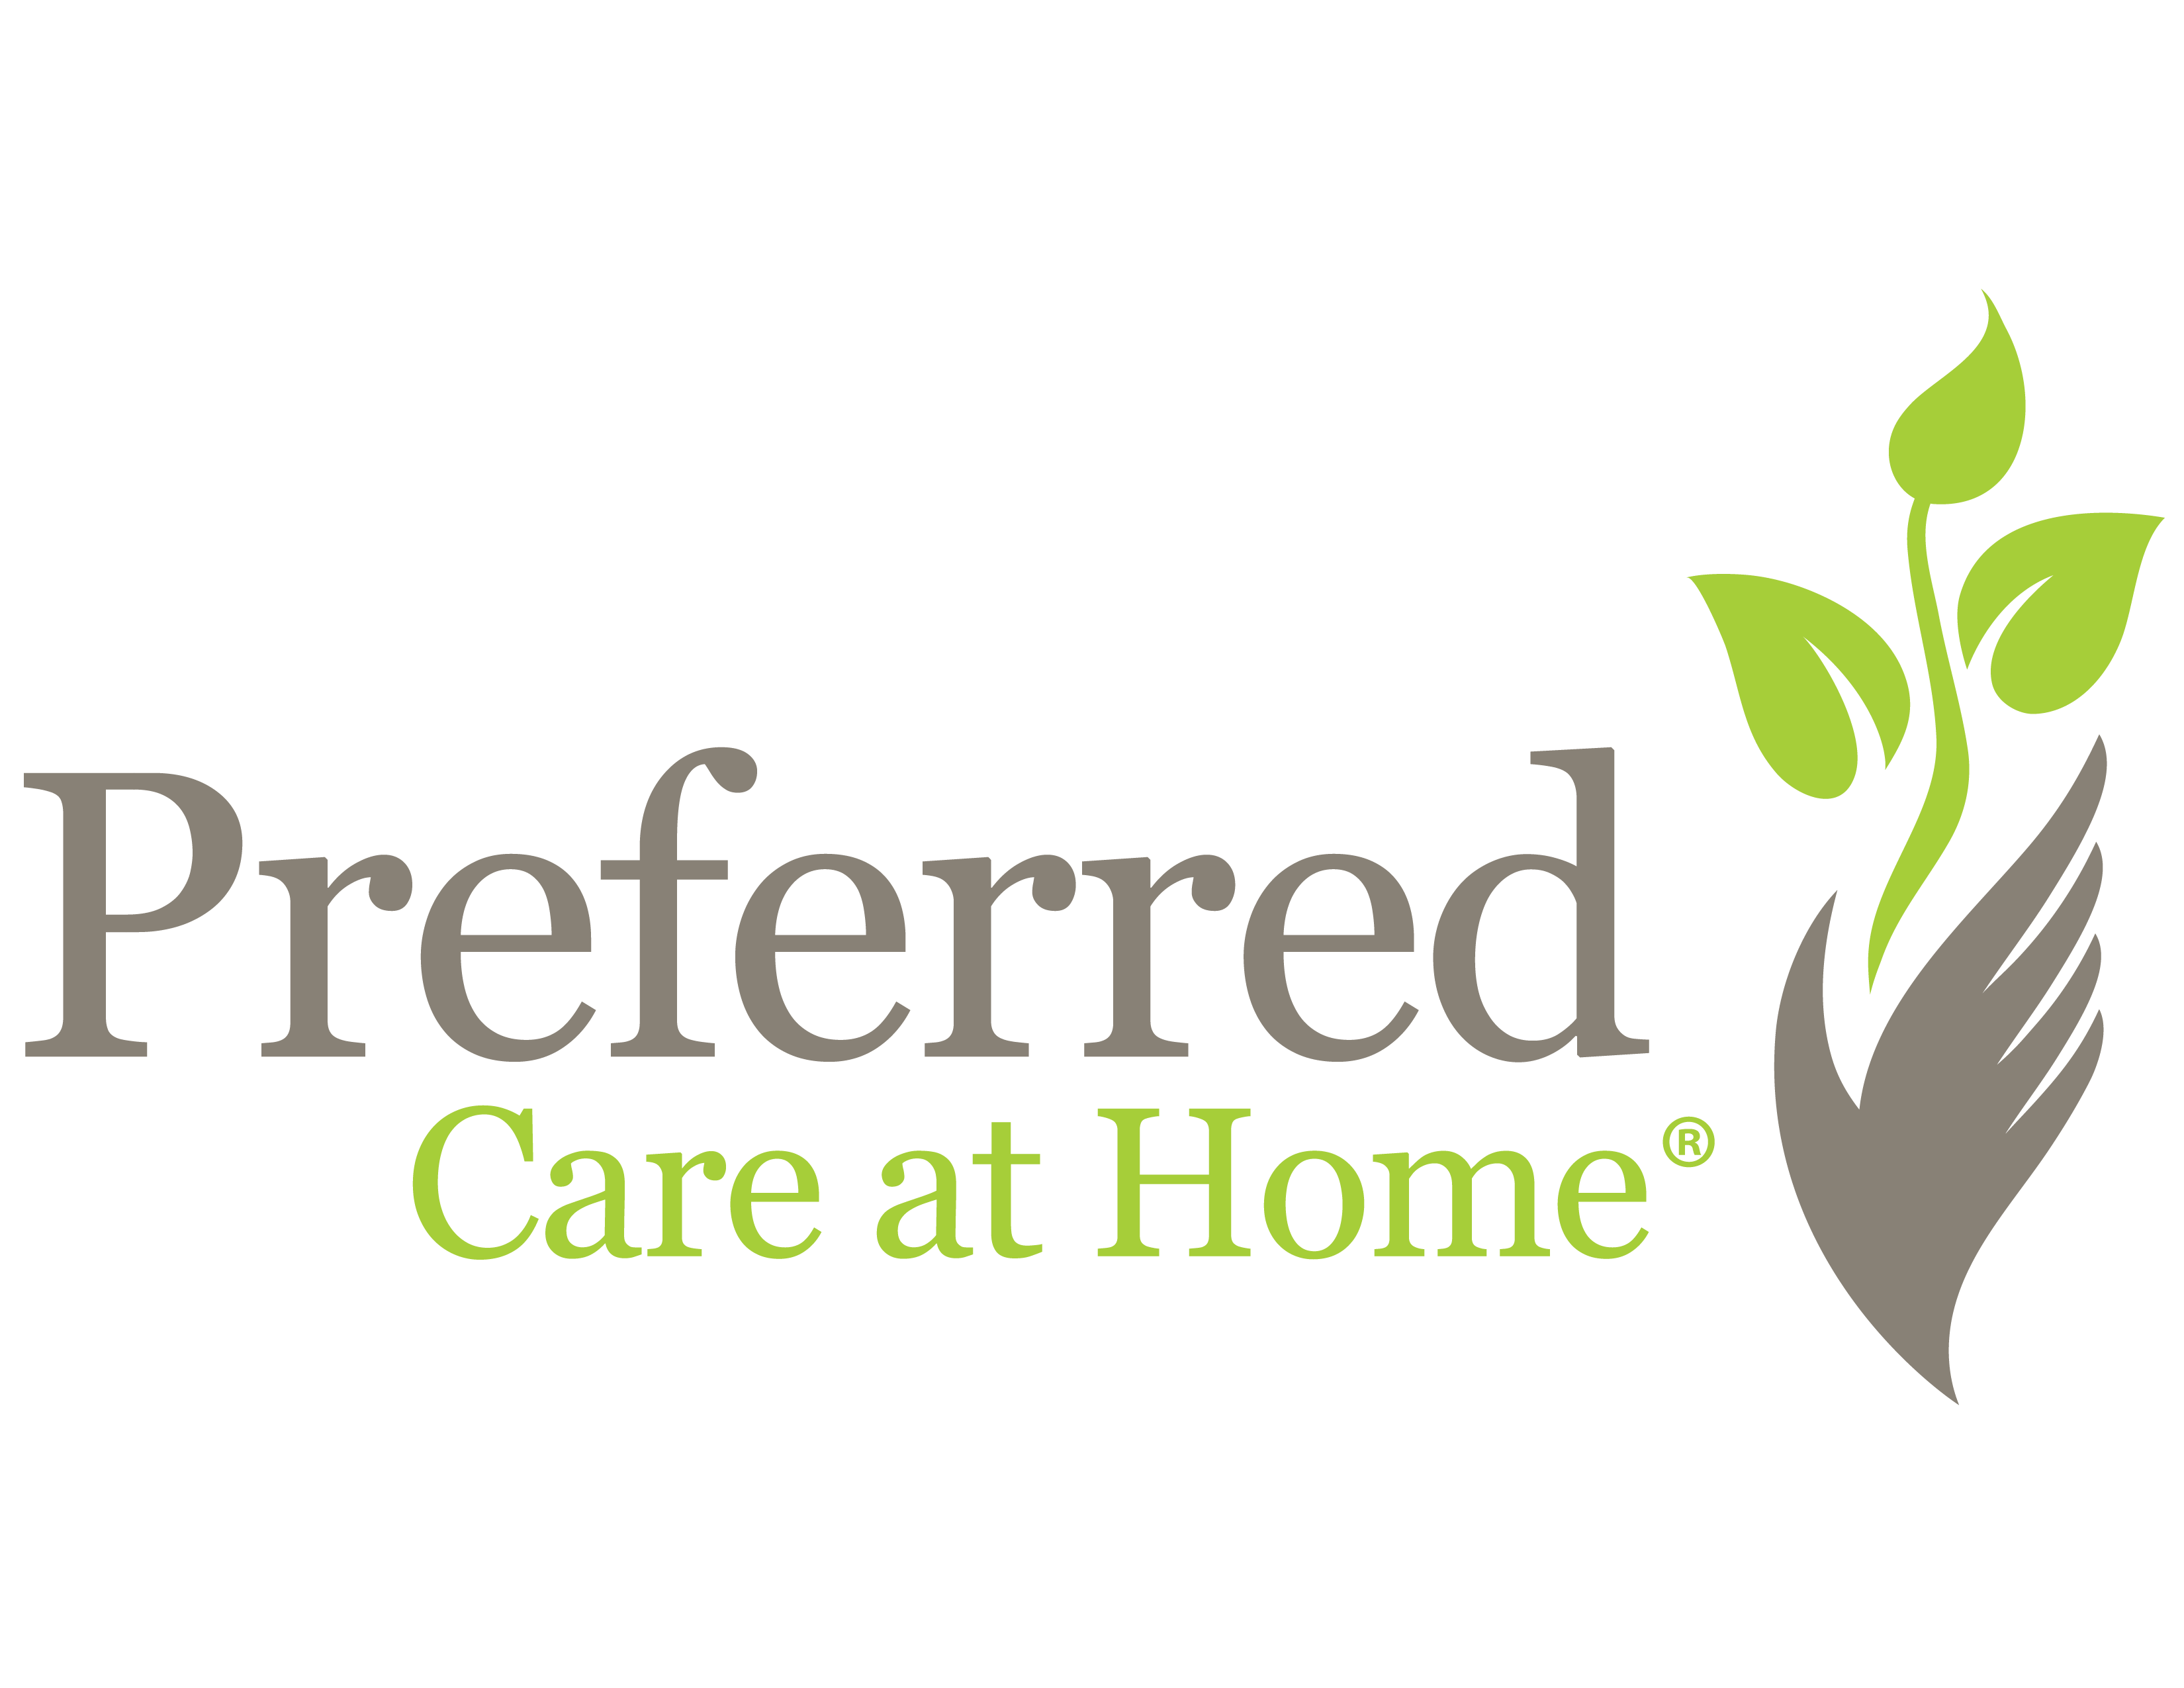 Preferred Care at Home of Metrowest Boston, MA - Framingham, MA